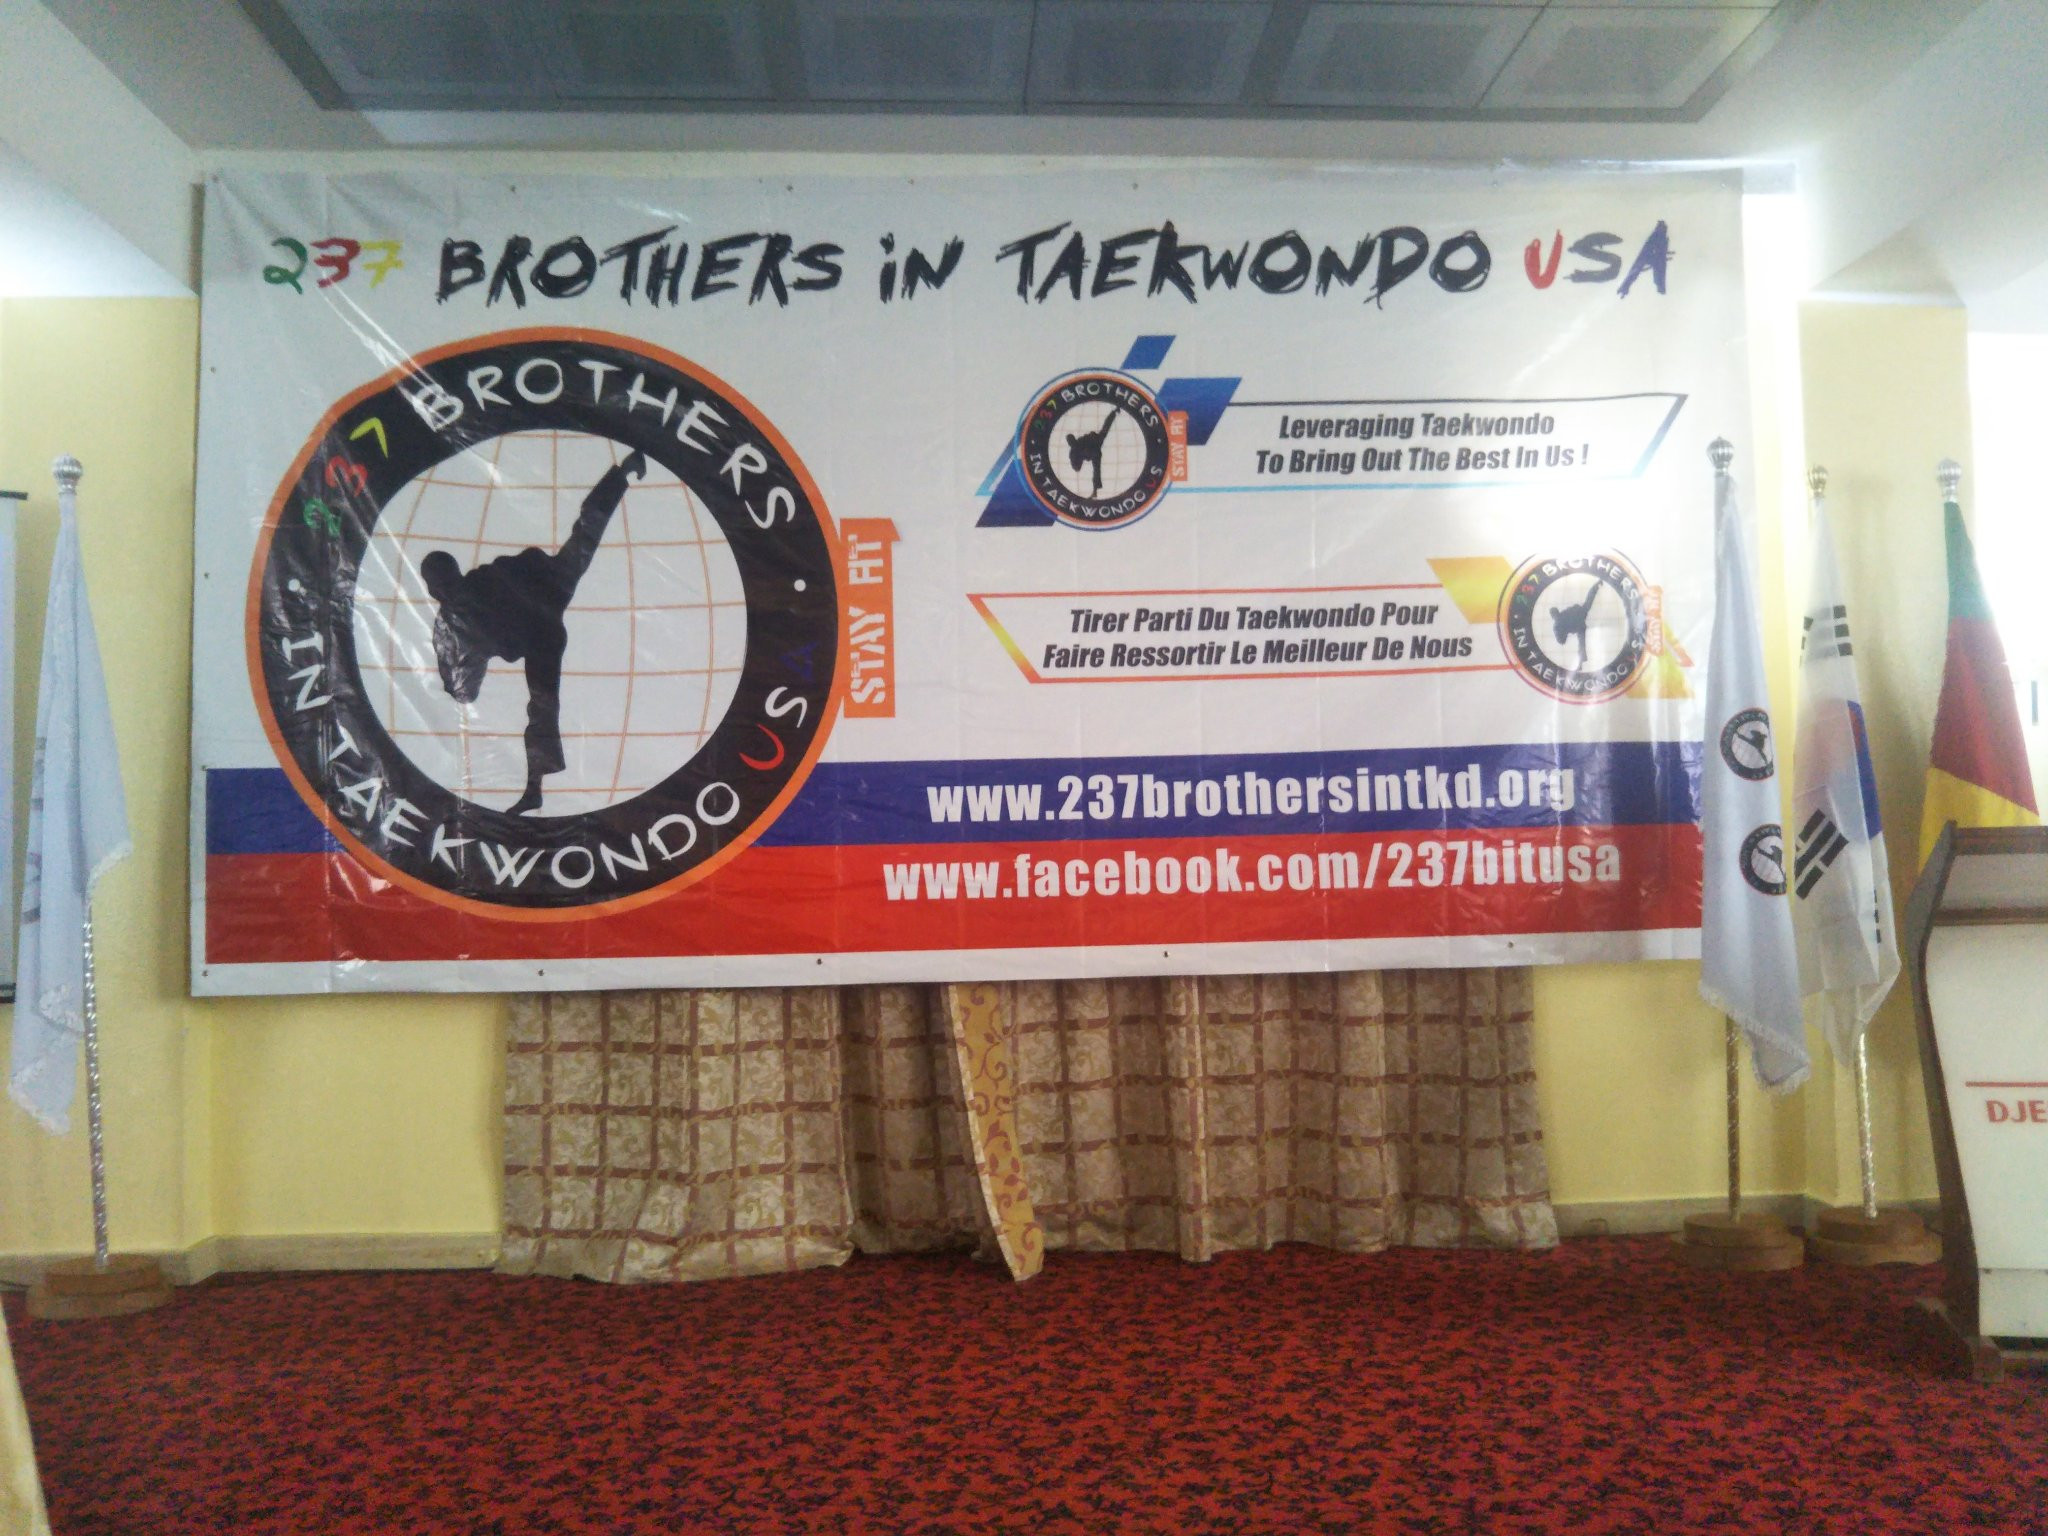 The meeting organised by the 237 Brothers in Taekwondo USA was held at the start of October ©Twitter/MyriamZouga